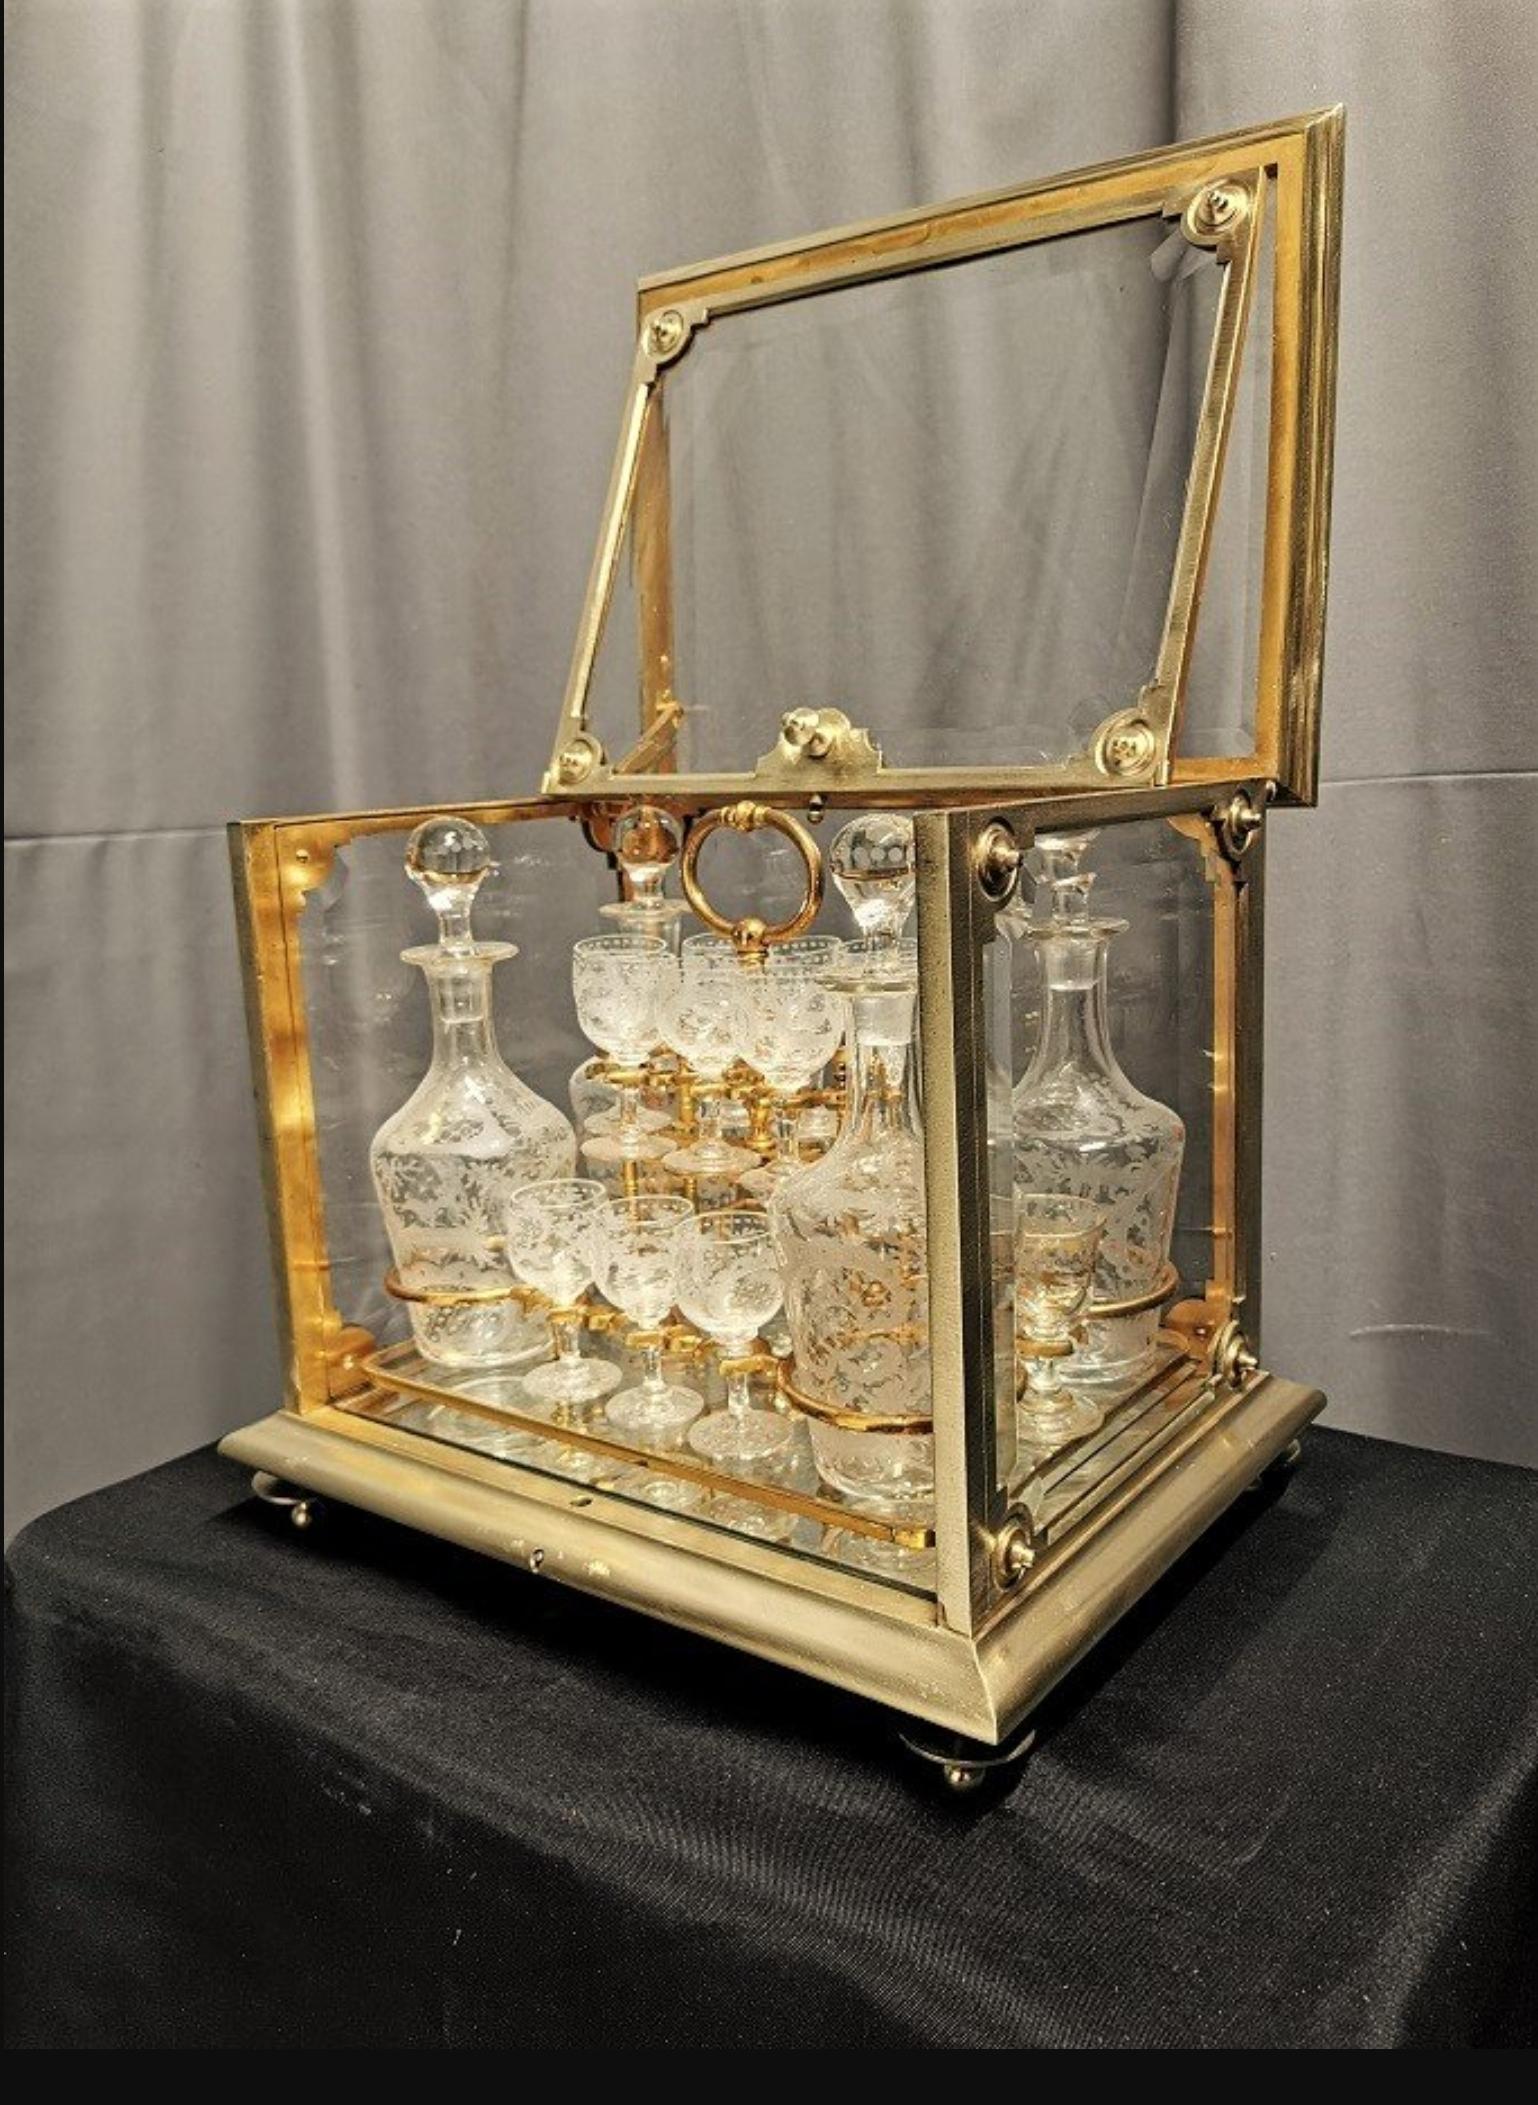 Stunning, impressive and really rare Napoleon III liquor cellar cabinet dry bar in Gilt Bronze and glass. Heavy and solid high quality materials.
Inside you will find 4 carafes bottles and 16 glasses in Baccarat crystal, beautifully